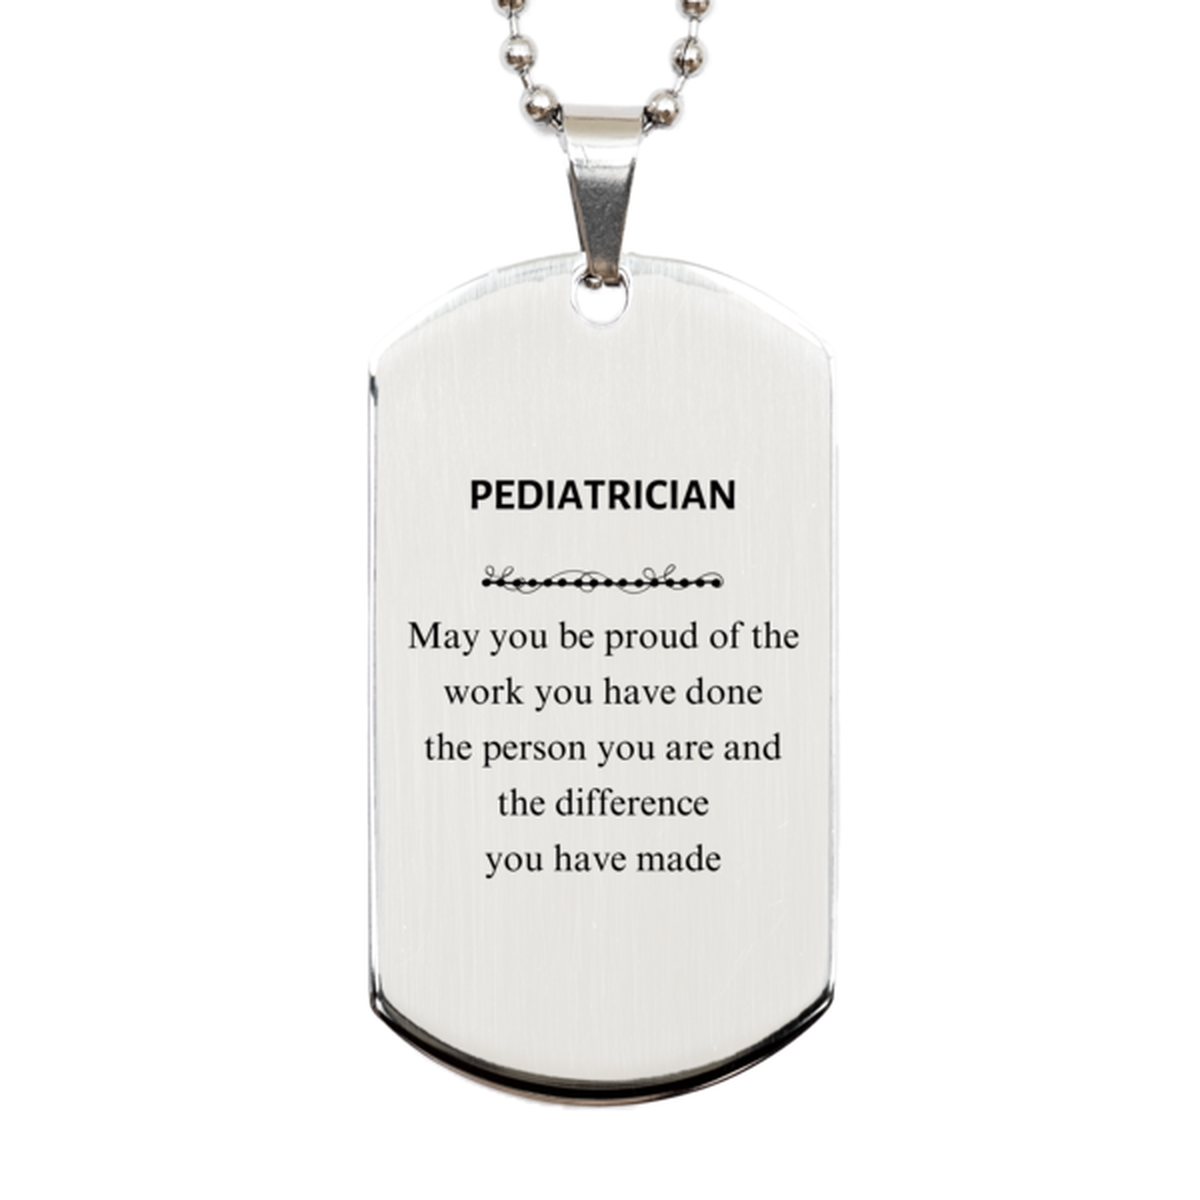 Pediatrician May you be proud of the work you have done, Retirement Pediatrician Silver Dog Tag for Colleague Appreciation Gifts Amazing for Pediatrician